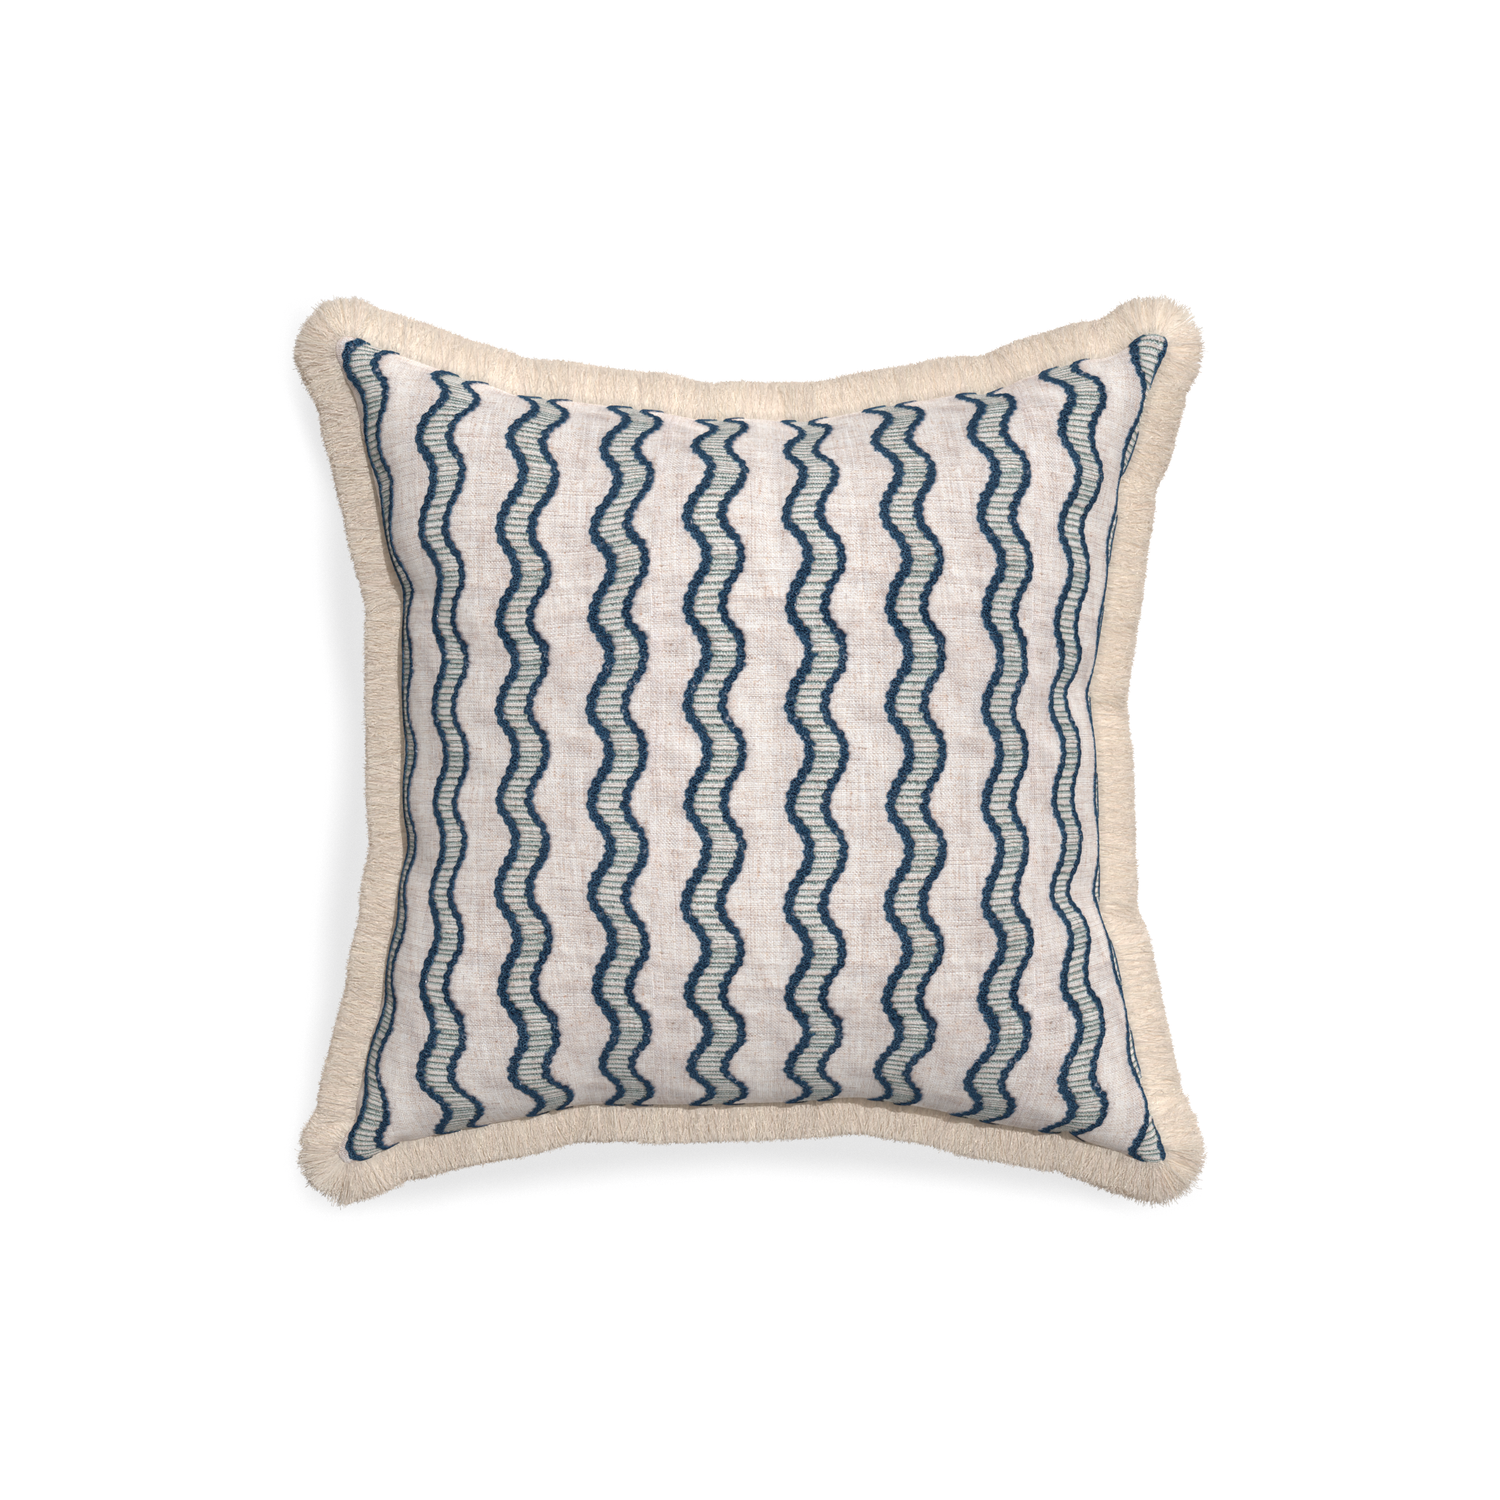 18-square beatrice custom embroidered wavepillow with cream fringe on white background